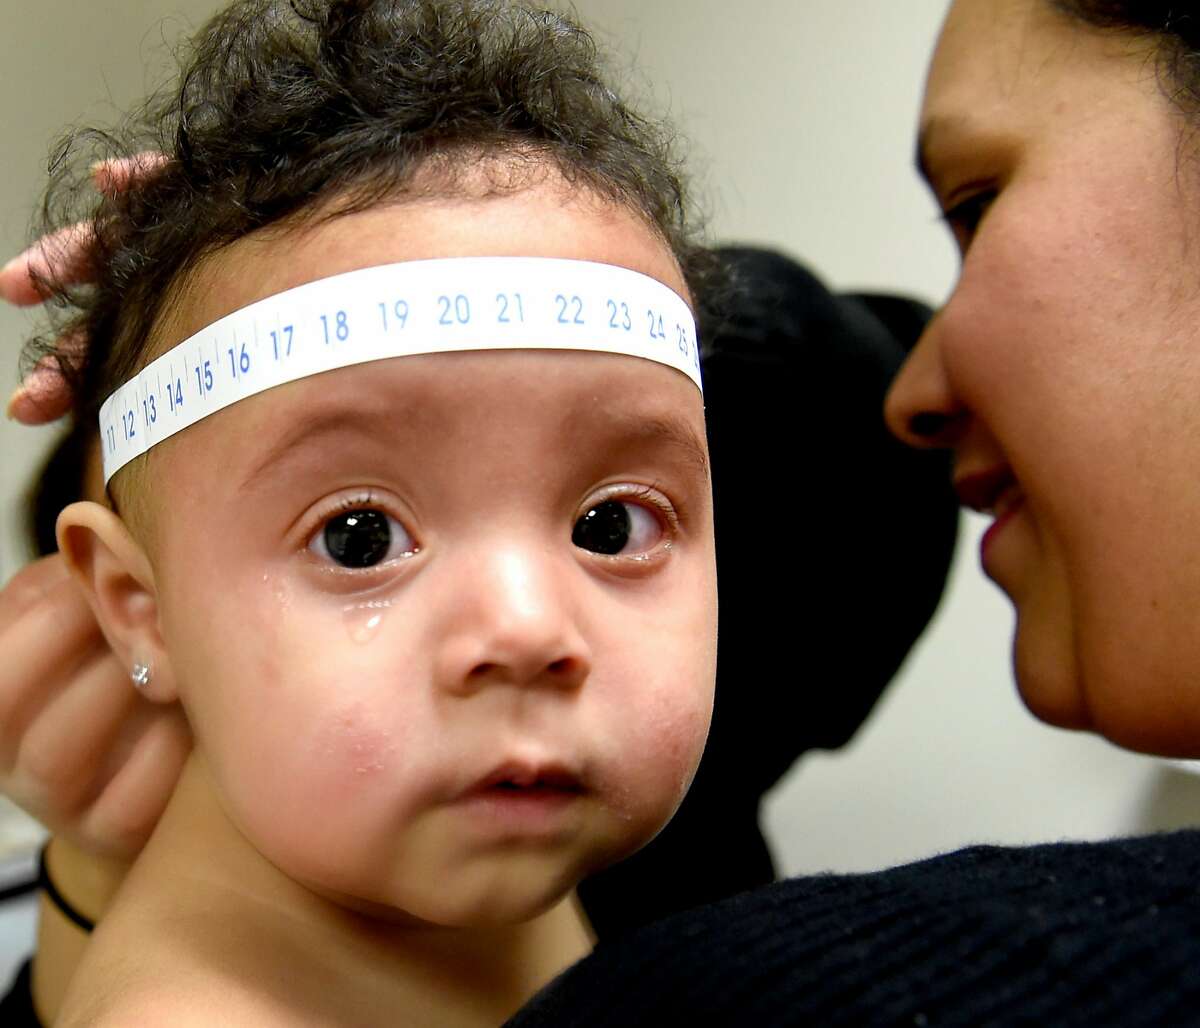 New Haven, Connecticut - Tuesday, October 3, 2017: Registered Nurse Cinthya (Cq) Chumpitaz of the Yale Children's Hispanic Clinic measures the head of Angela Guzman, 1, of New Haven as mother Elena Martinez holds her son during the one-year vitals check up of the baby at the clinic recently. This clinic, also known as Y-CHiC. is a culturally and linguistically based primary care service for children ages 0-12 months and their families. This new program integrates language and cultural competency into residency training while at the same time providing quality pediatric clinical care to children and their families completely in Spanish.